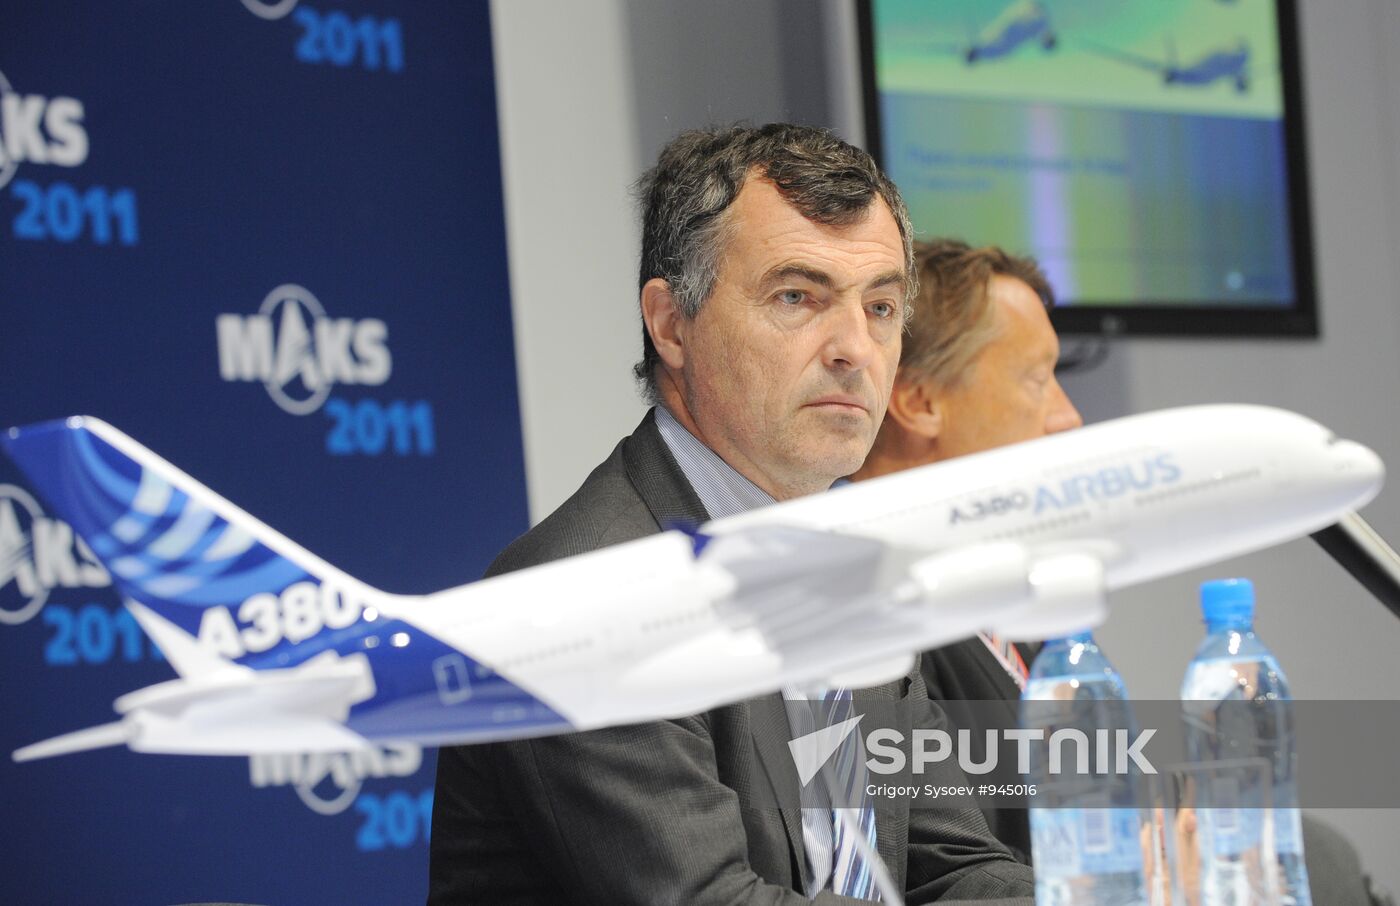 Airbus senior managers hold news conference